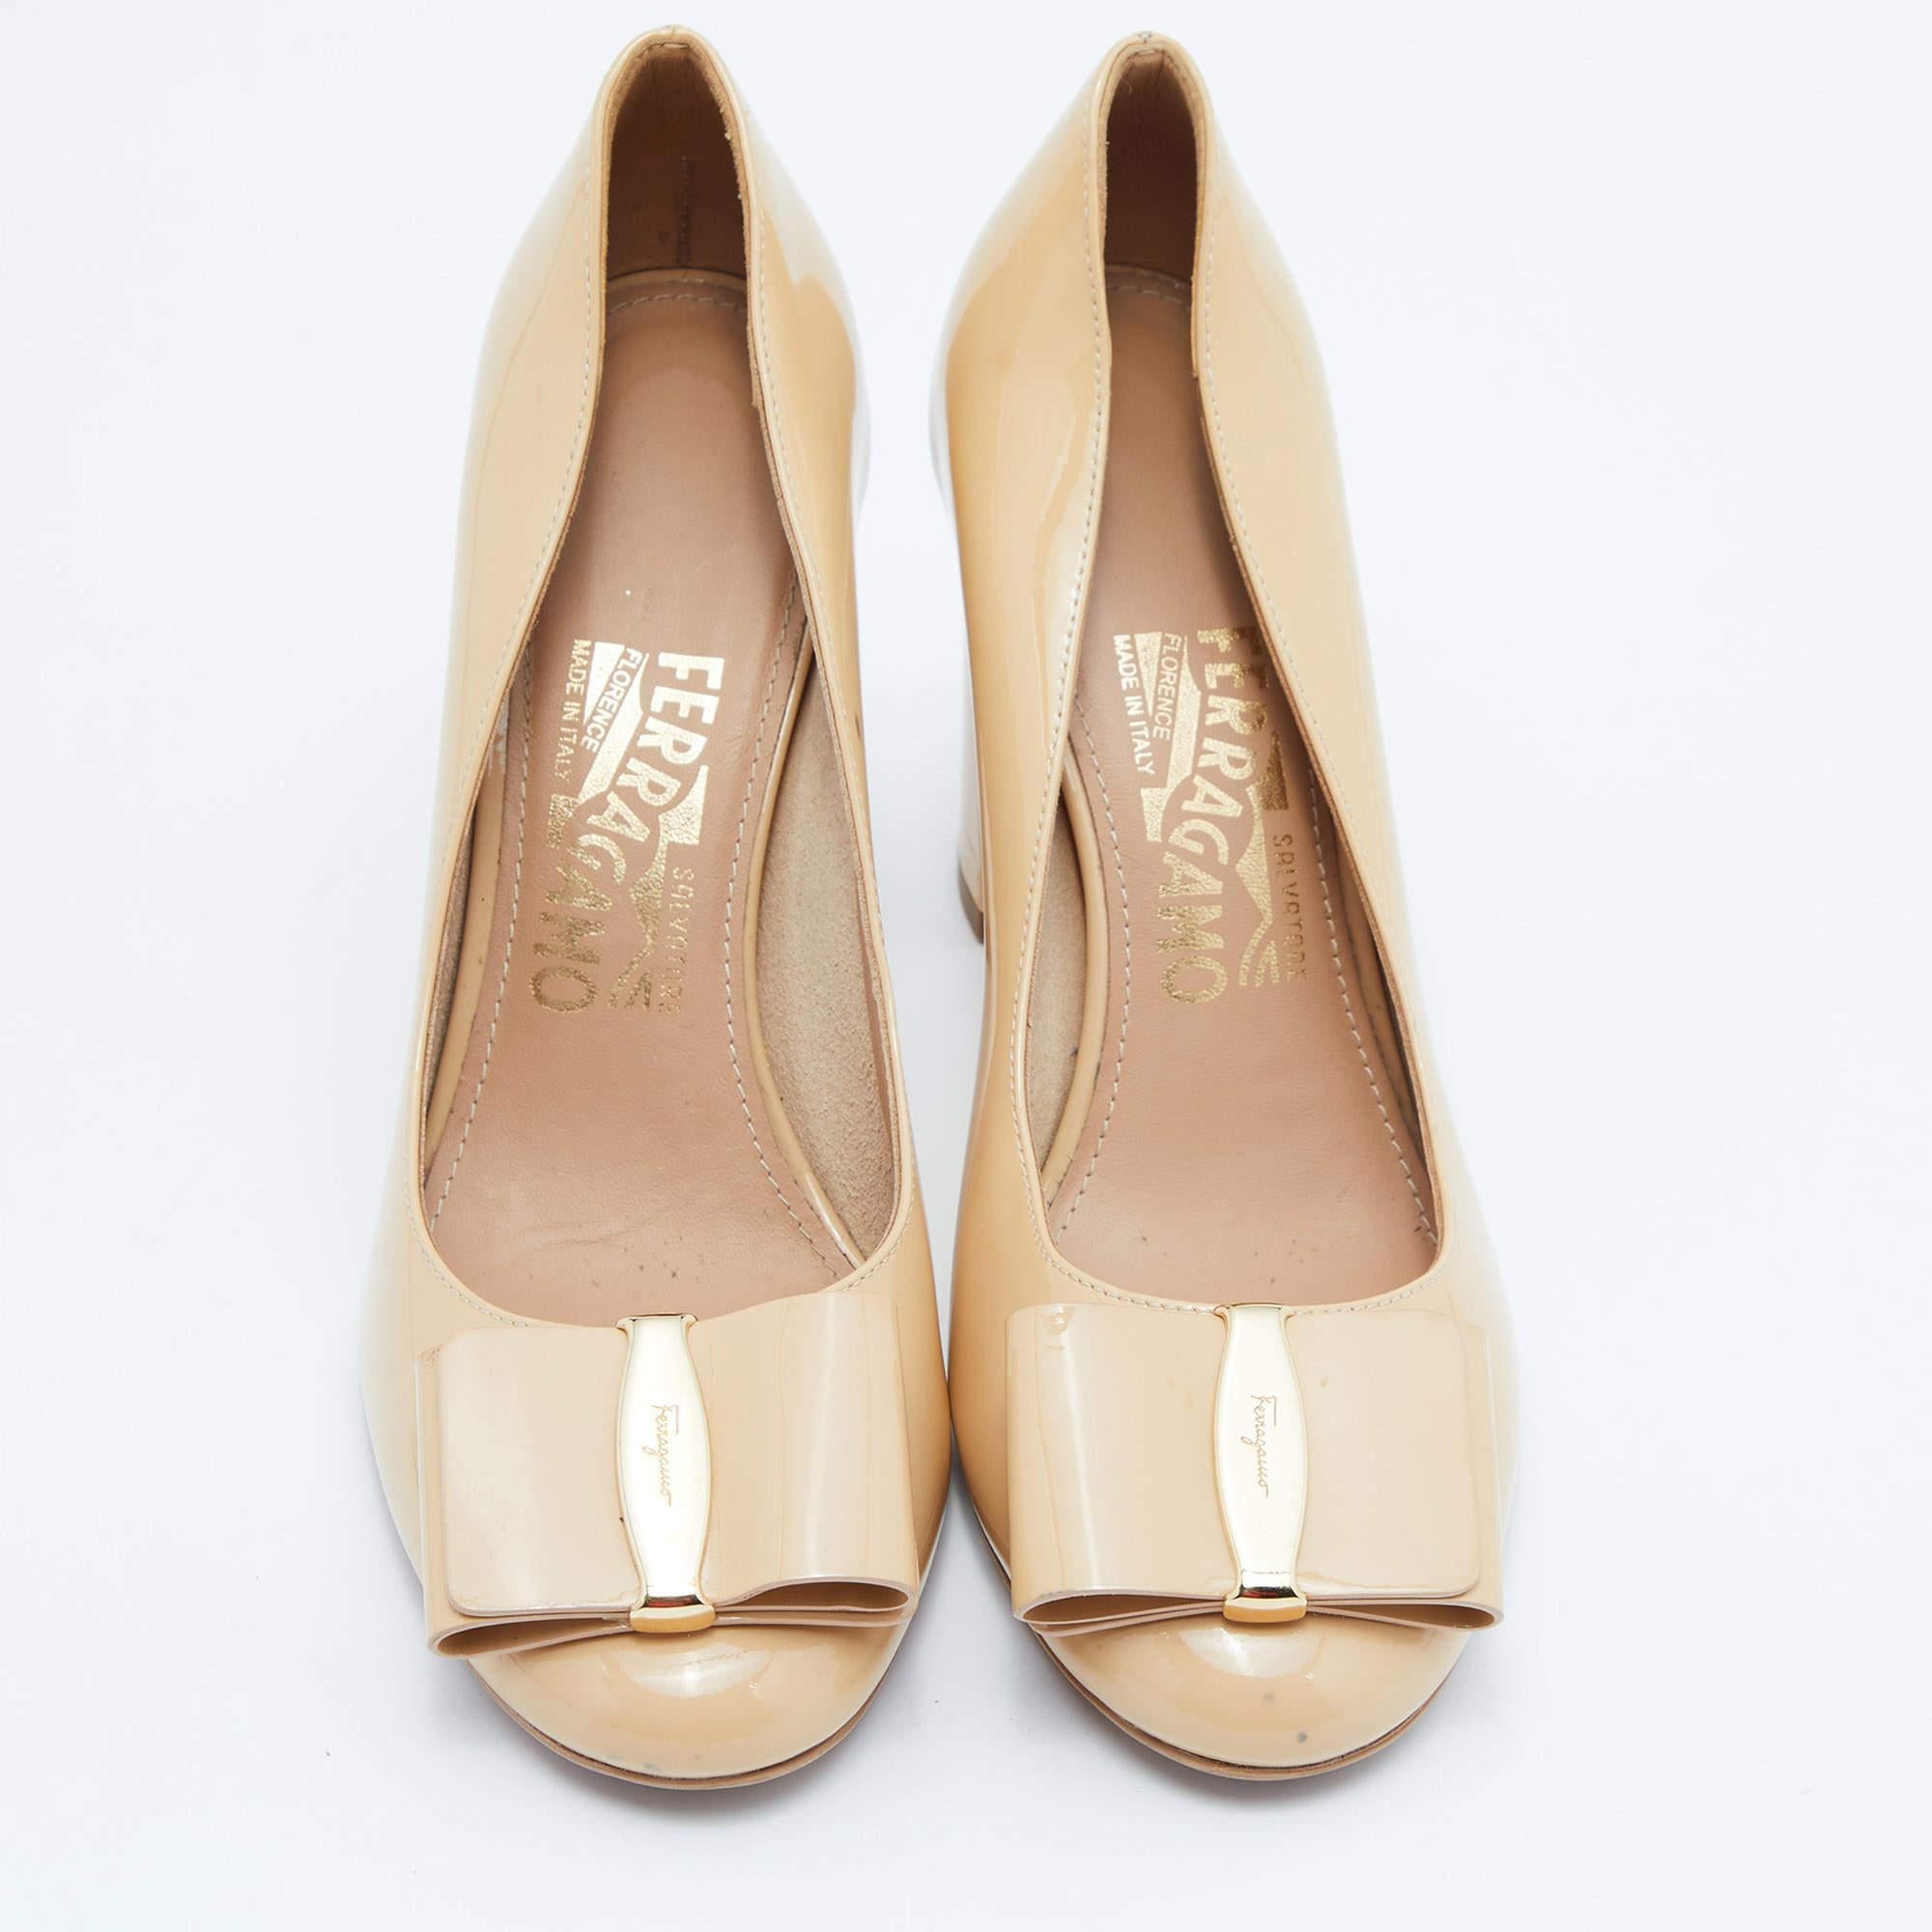 Nothing like a stunning pair of pumps to look and feel like a fashionista! Crafted from beige patent leather, this gorgeous Ferragamo pair features Vara bow motif on the toes and comfortable insoles. Complete with 9cm heels, these shoes are ideal